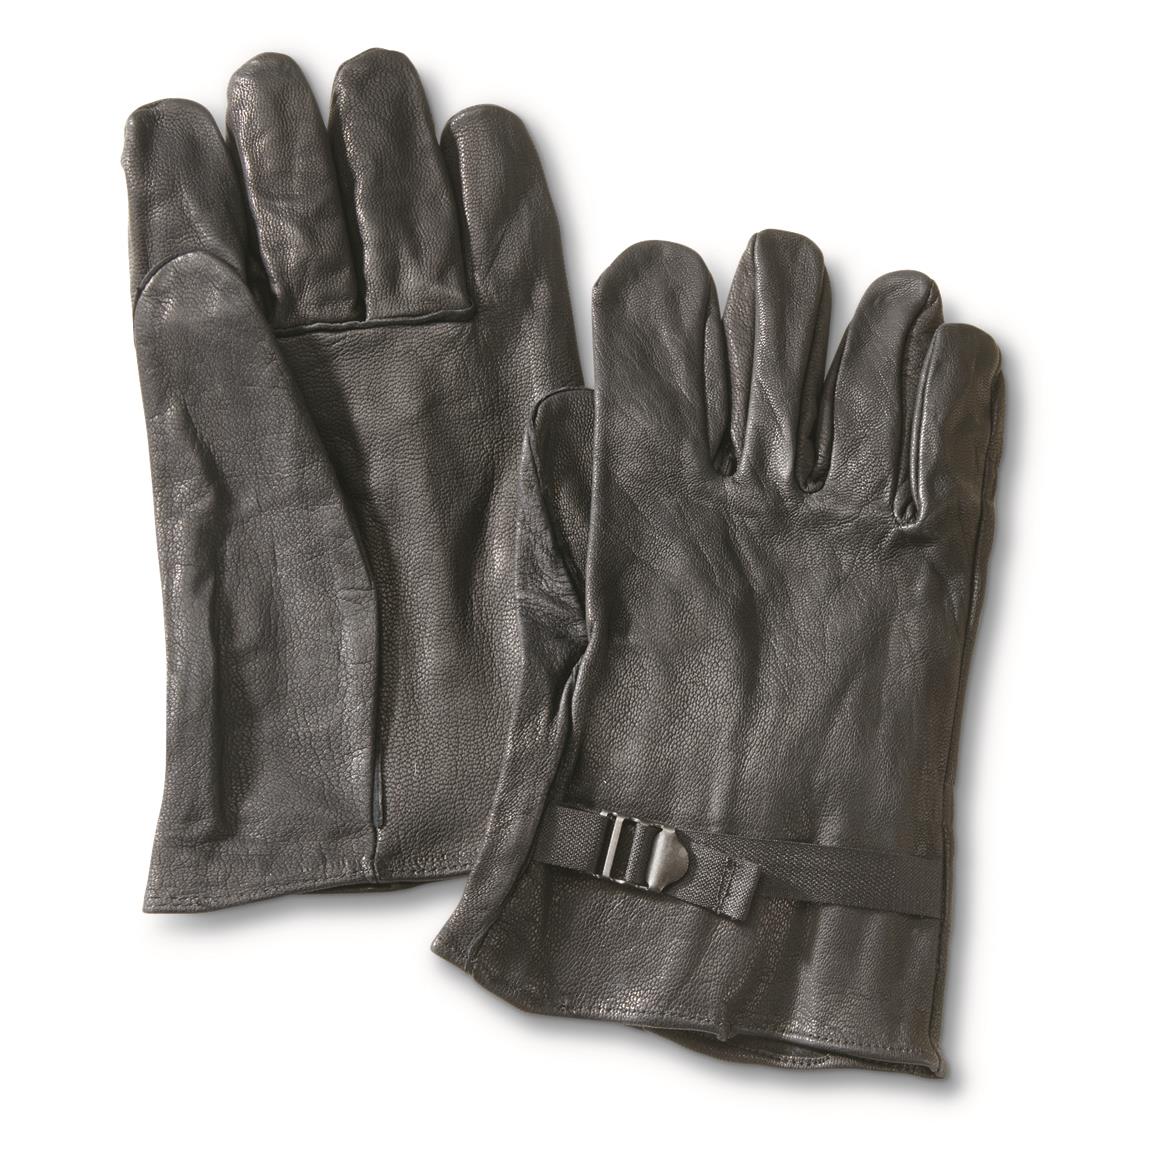 Belgian Military Surplus D3A Leather Gloves, 2 Pairs, New, Black